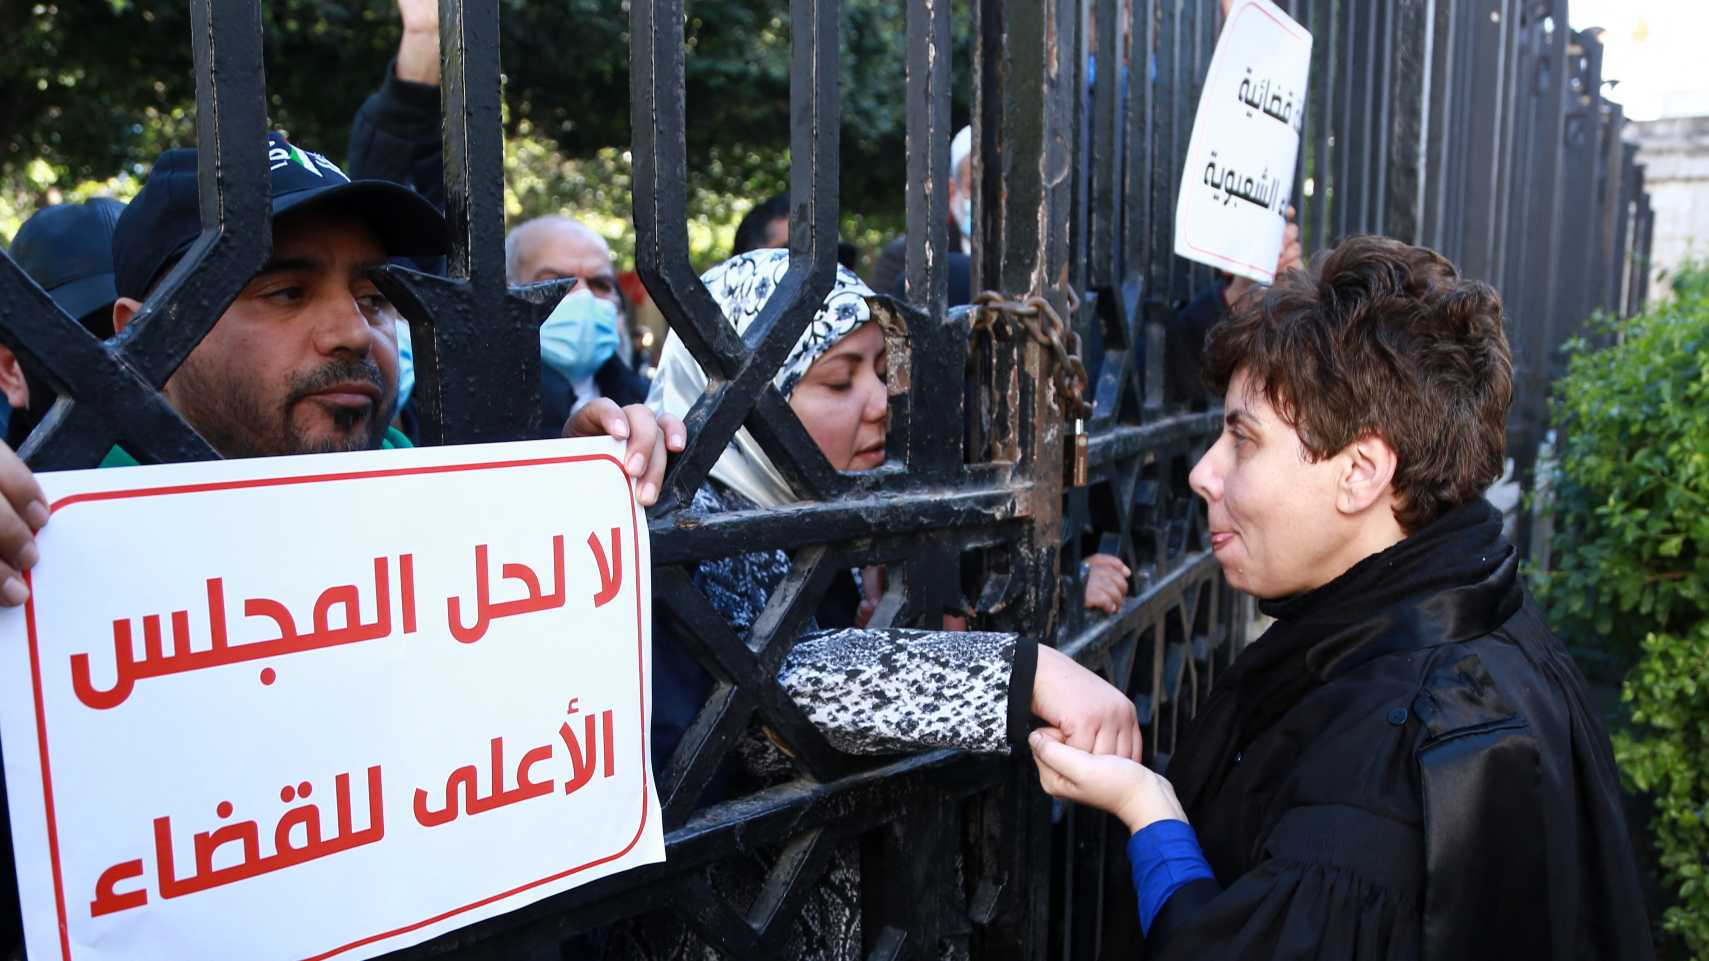 unisian civilians join a protest by judges against the dissolution of the Supreme Judicial Council (CSM) by the Tunisian president, in Tunis on February 10, 2022. 